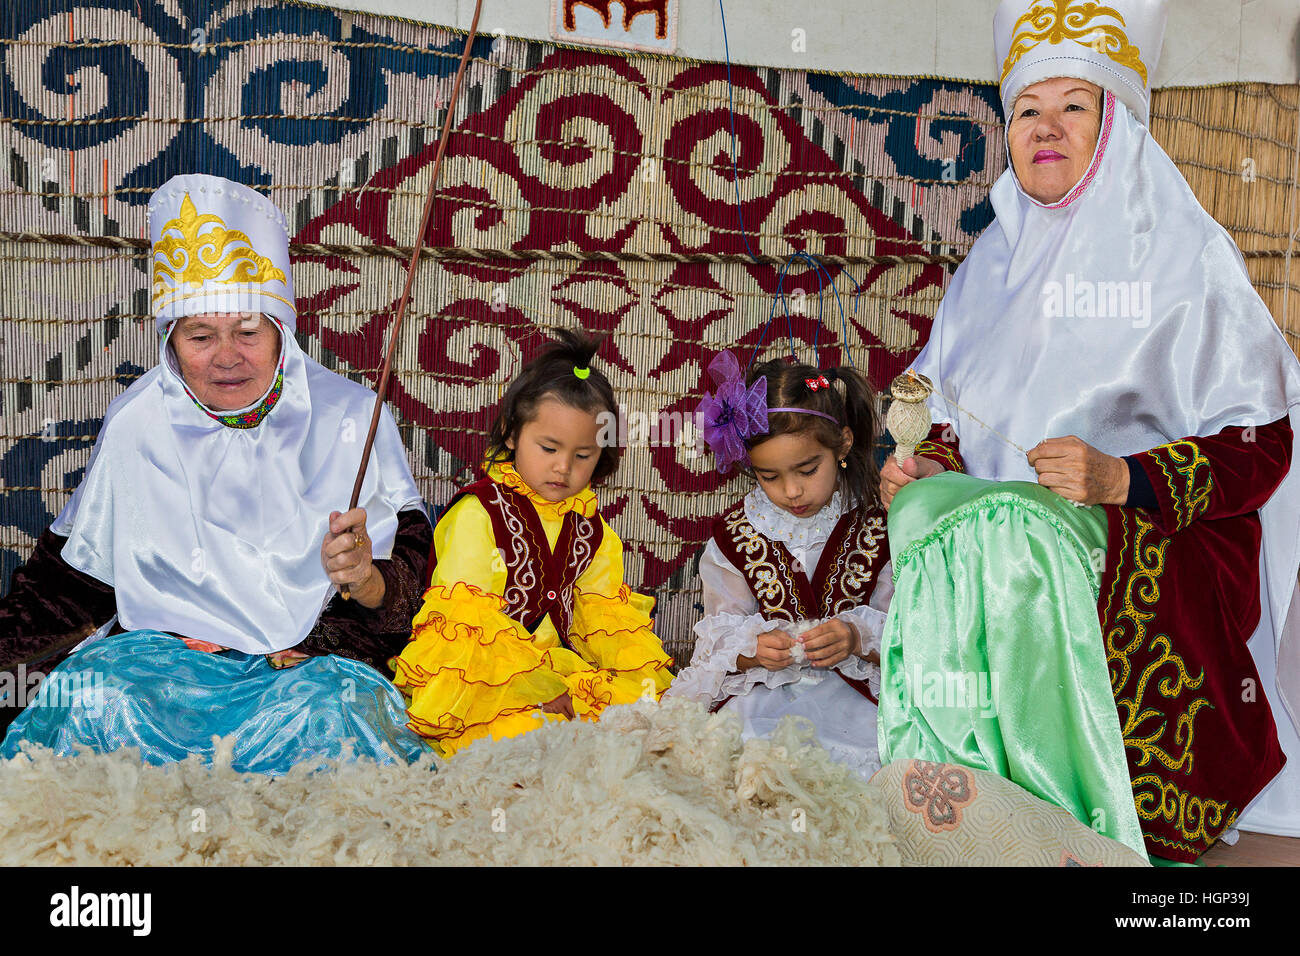 Kazakh women and children sit together and a woman taps the wool to make it fluffy. Stock Photo